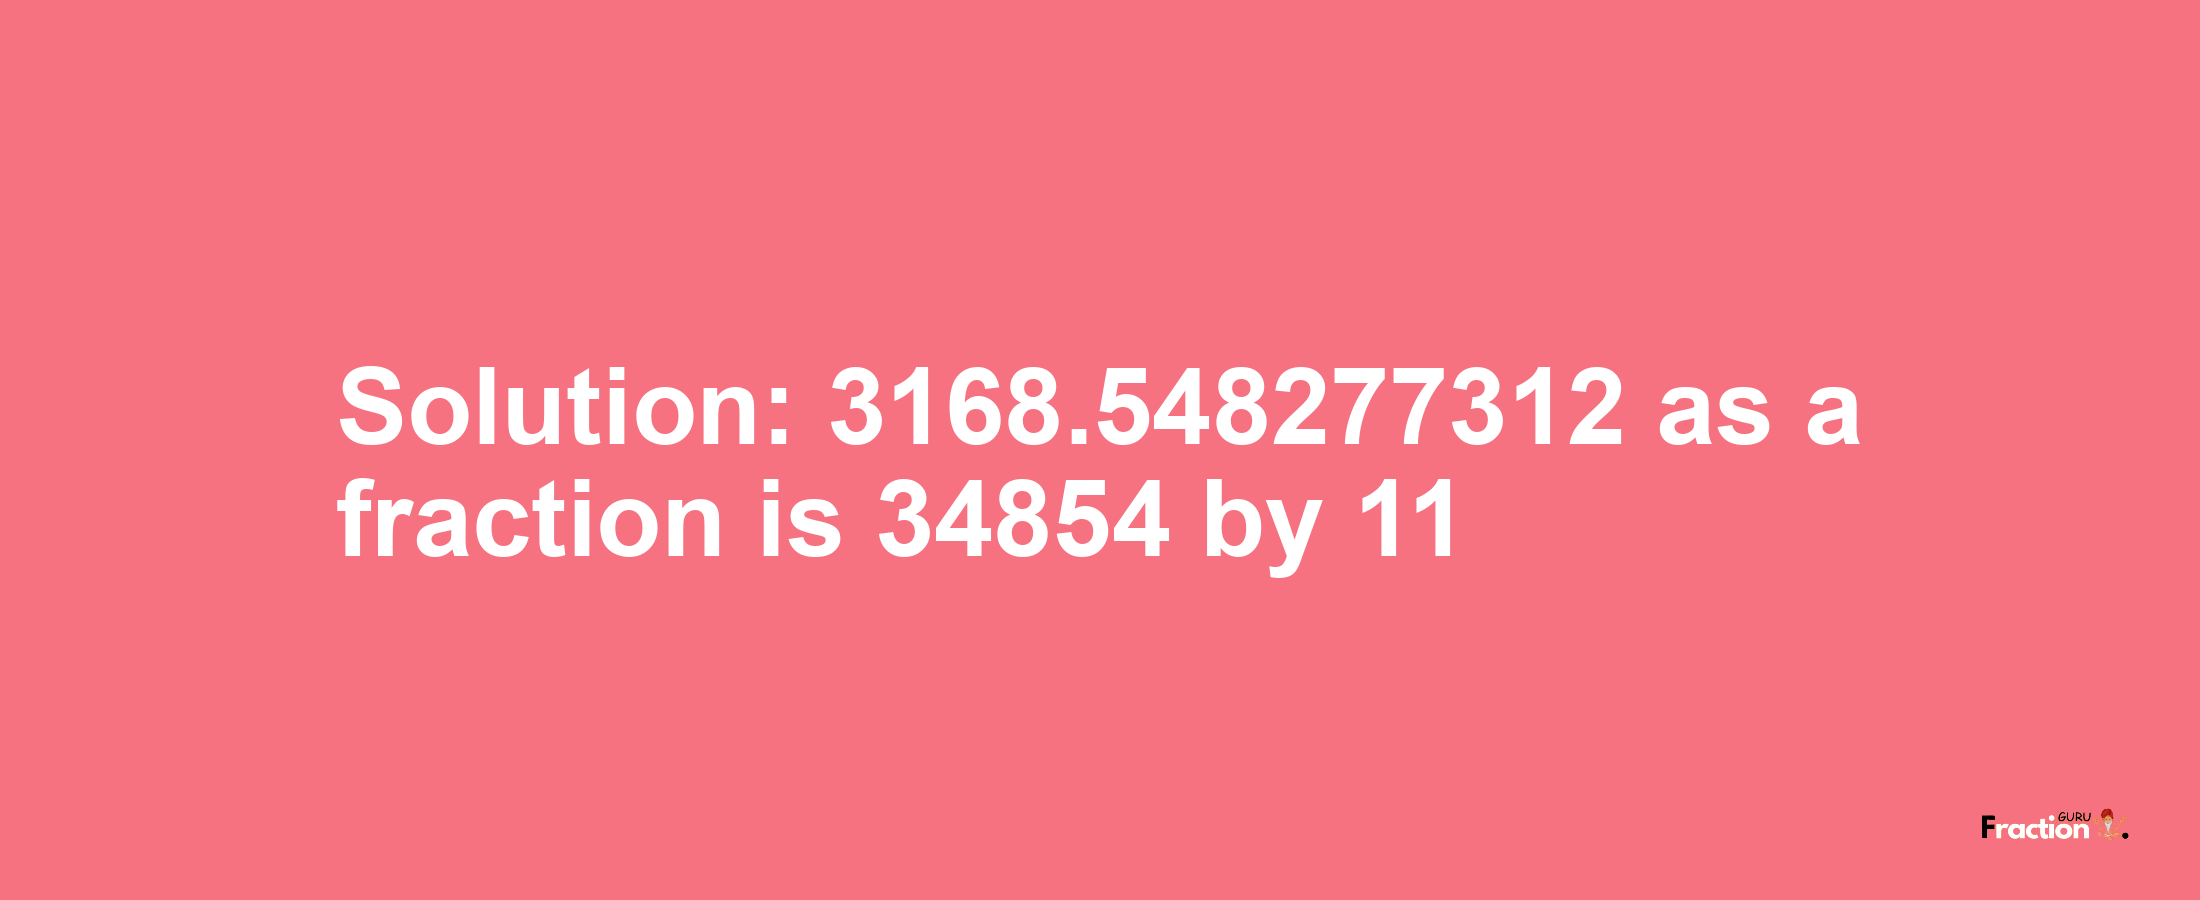 Solution:3168.548277312 as a fraction is 34854/11